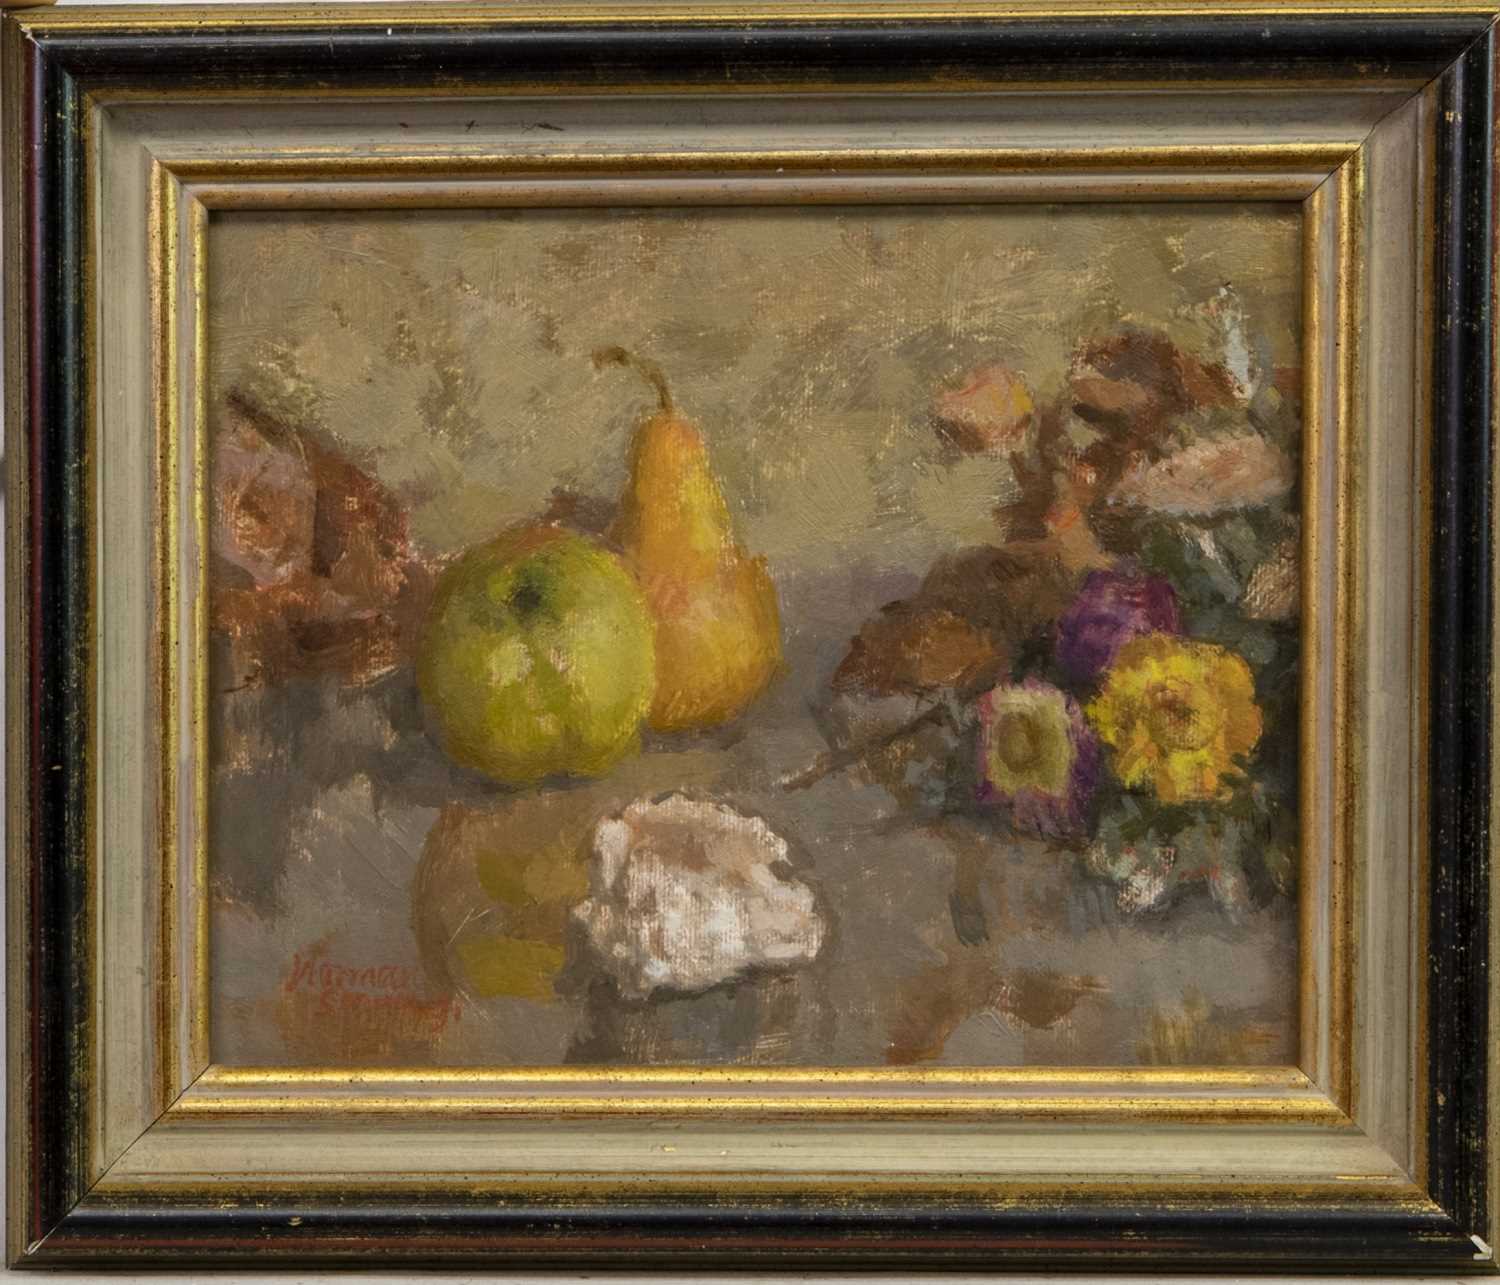 Lot 415 - STILL LIFE WITH PEARS AND FLOWERS, AN OIL BY NORMAN SMITH